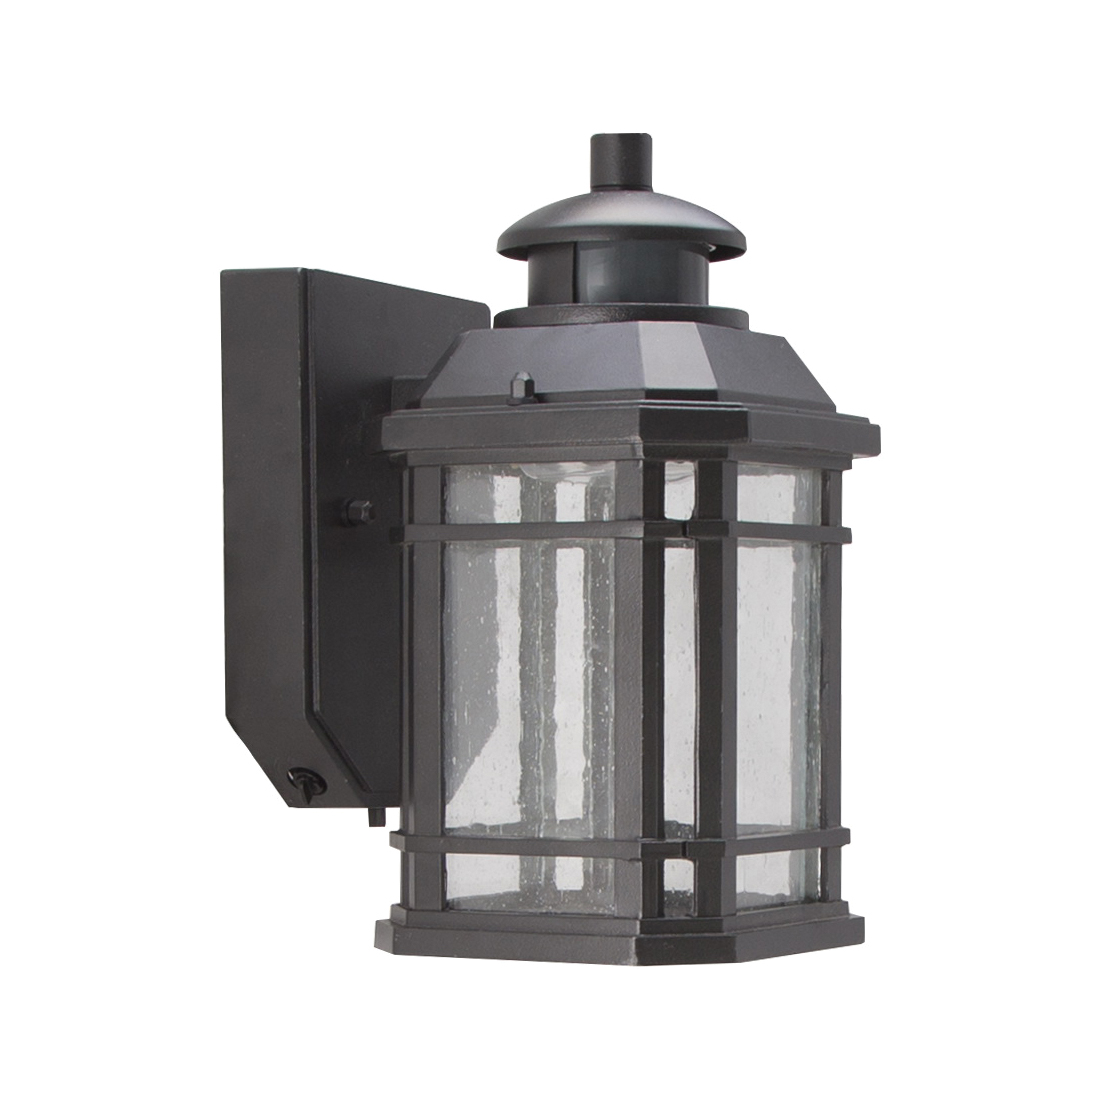 LED-0214-WD-SE Outdoor Motion Activated Wall Lantern, 120 V, 10.5 W, LED Lamp, 350 Lumens, Black Fixture